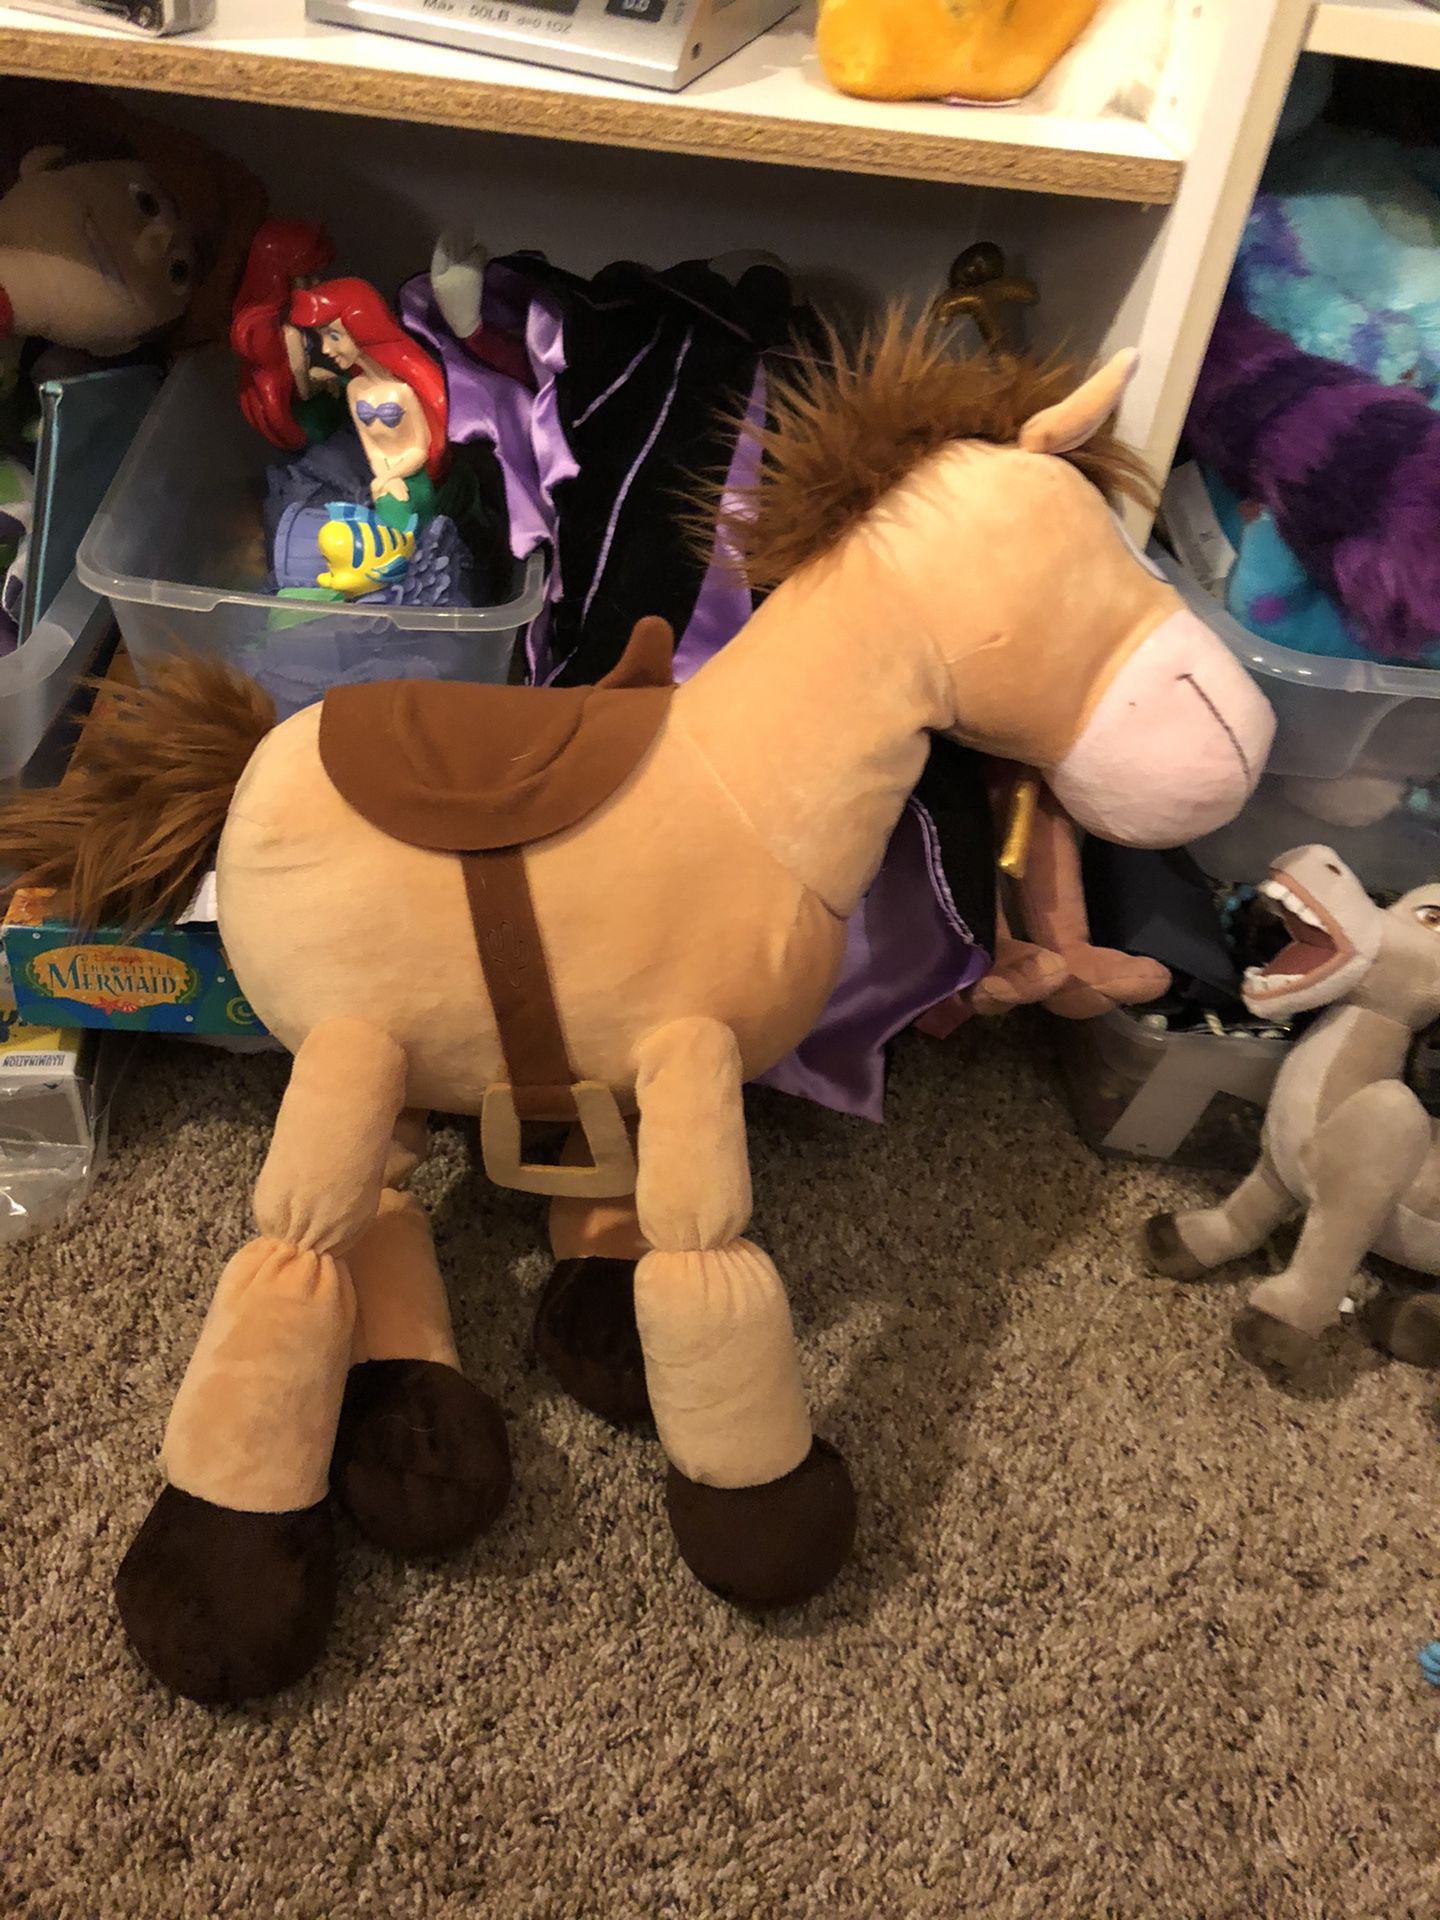 2” foot long Toy Story Bullseye 🎯 horse plush plushie doll toy! Disneyland doll! Very rare and adorable! 24” long!!!